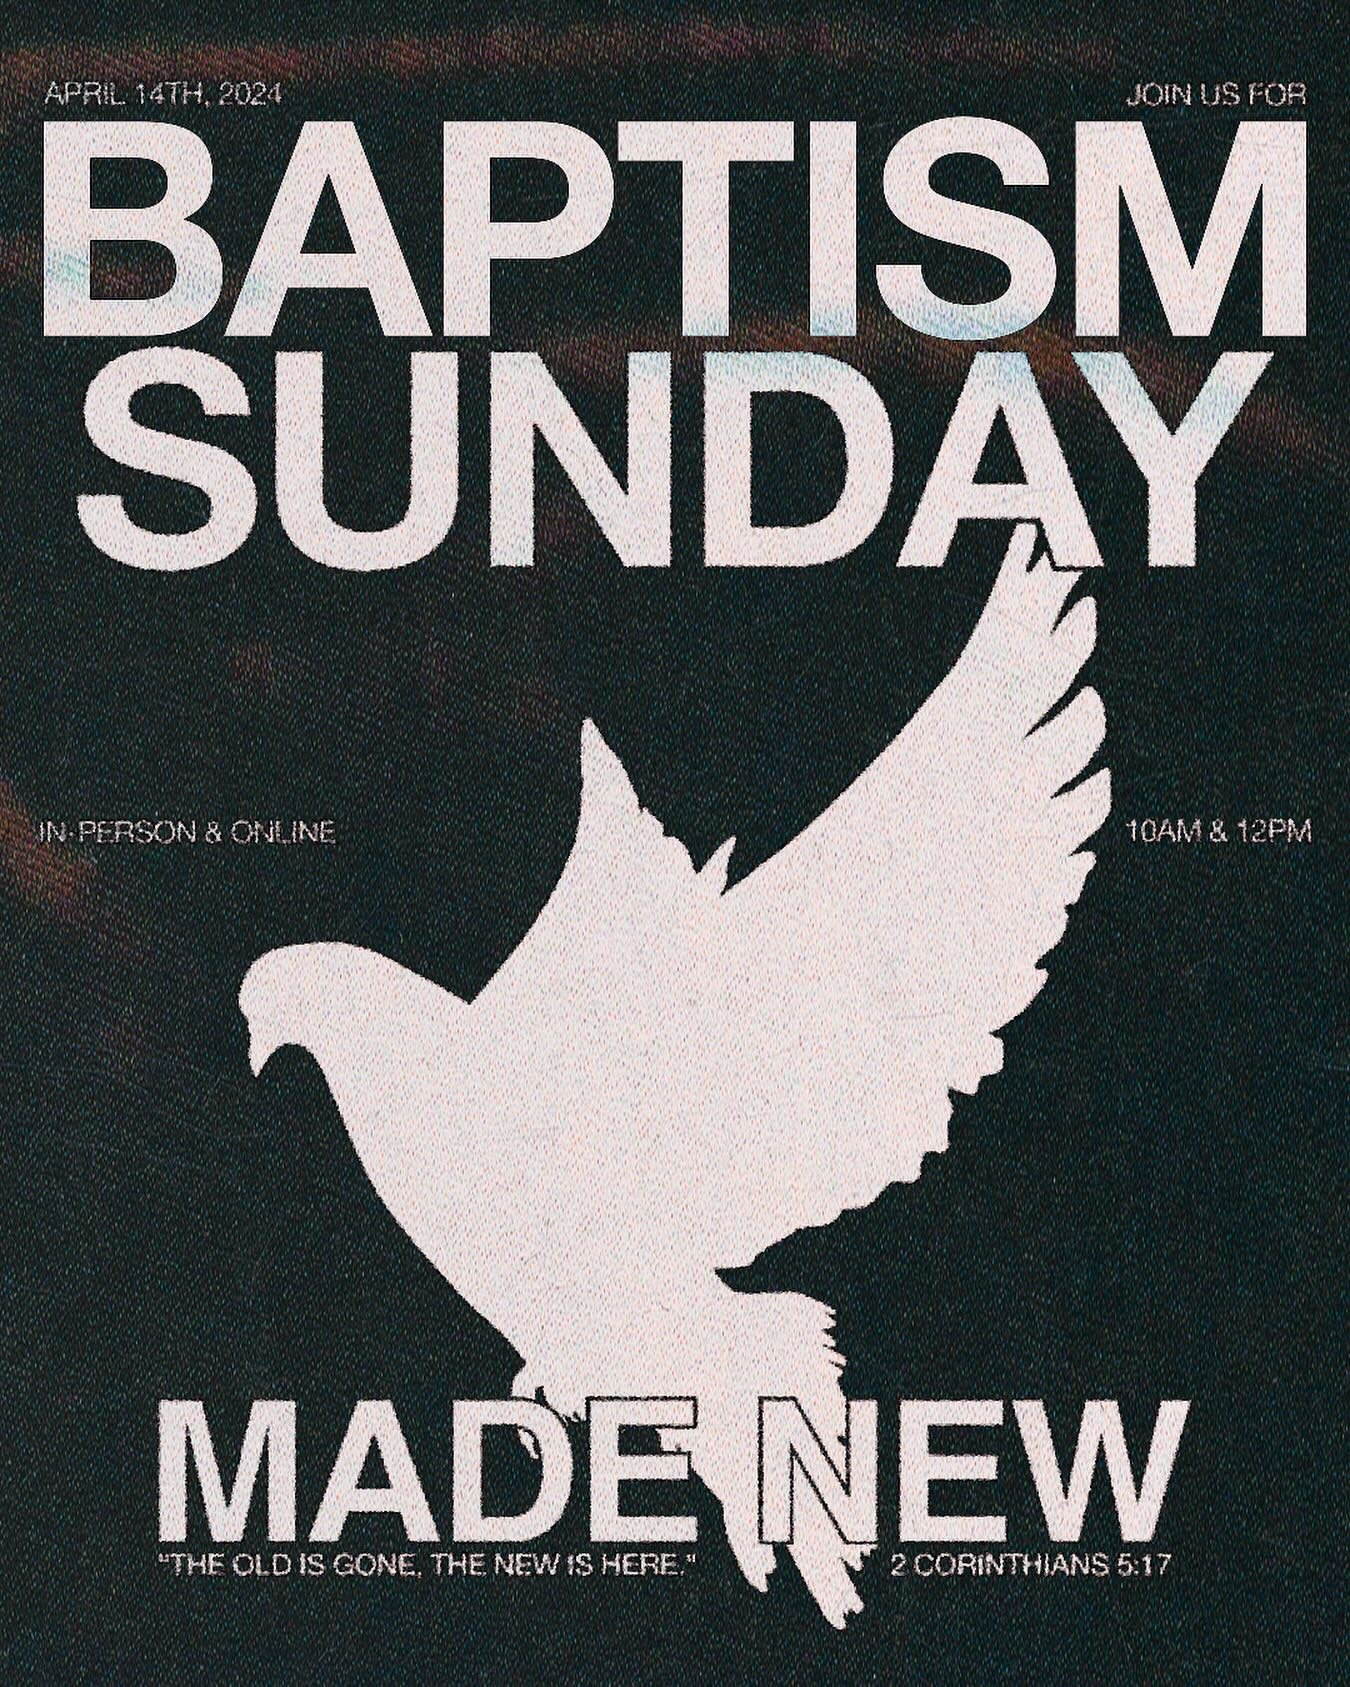 THIS SUNDAY WE ARE CELEBRATING BAPTISM SUNDAY!

The old is gone, the new is here. This is an outward expression of an inward decision! Are you ready to take this next step? Sign up today at bravemiami.com/connect.